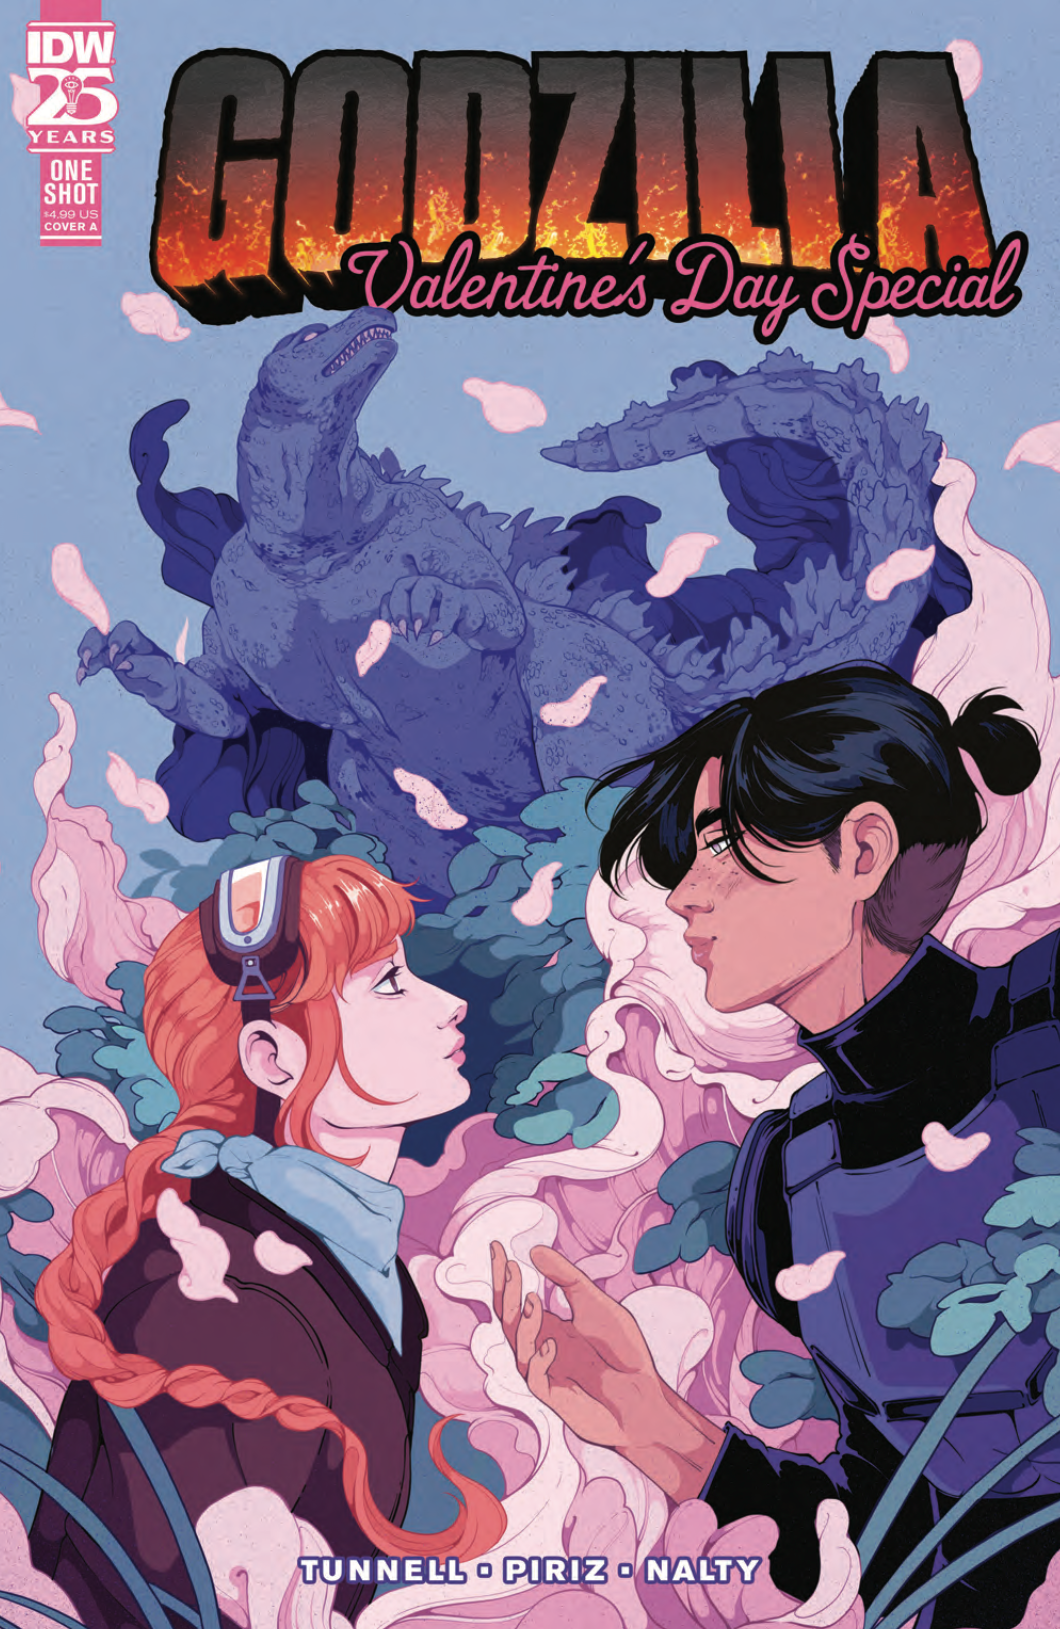 In the cover art for the Godzilla Valentine's Day Special, a sapphic couple (Penn and Lieutenant) make heart eyes for each over while Godzilla attacks in the background. 